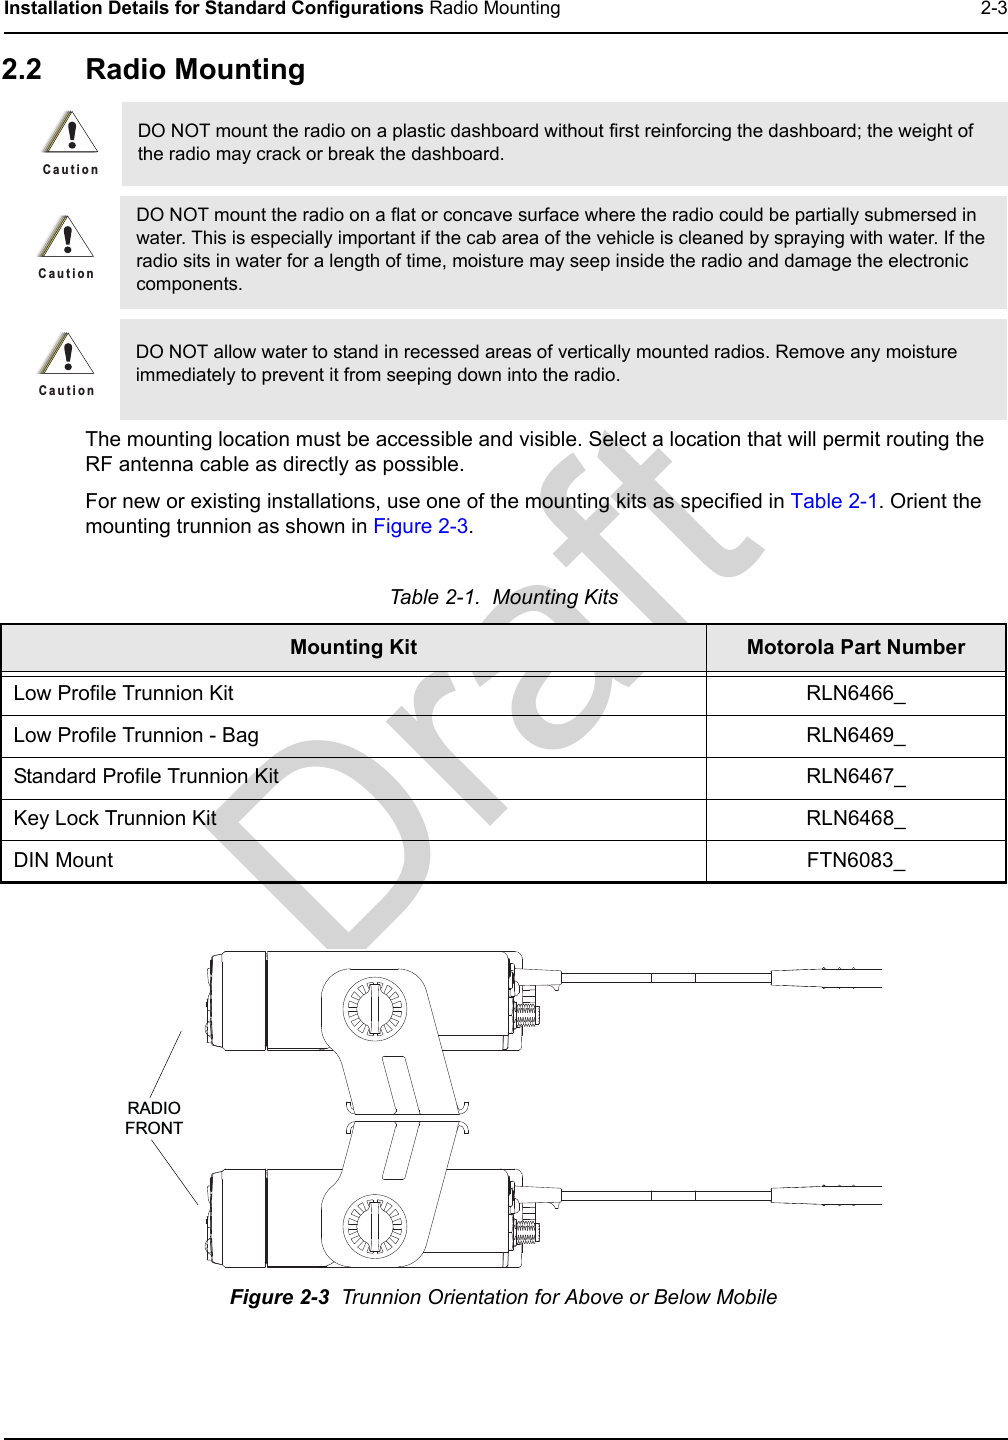 DraftInstallation Details for Standard Configurations Radio Mounting 2-32.2 Radio MountingThe mounting location must be accessible and visible. Select a location that will permit routing the RF antenna cable as directly as possible. For new or existing installations, use one of the mounting kits as specified in Table 2-1. Orient the mounting trunnion as shown in Figure 2-3.DO NOT mount the radio on a plastic dashboard without first reinforcing the dashboard; the weight of the radio may crack or break the dashboard.DO NOT mount the radio on a flat or concave surface where the radio could be partially submersed in water. This is especially important if the cab area of the vehicle is cleaned by spraying with water. If the radio sits in water for a length of time, moisture may seep inside the radio and damage the electronic components.DO NOT allow water to stand in recessed areas of vertically mounted radios. Remove any moisture immediately to prevent it from seeping down into the radio.Table 2-1.  Mounting KitsMounting Kit Motorola Part NumberLow Profile Trunnion Kit RLN6466_Low Profile Trunnion - Bag RLN6469_Standard Profile Trunnion Kit RLN6467_Key Lock Trunnion Kit RLN6468_DIN Mount FTN6083_Figure 2-3  Trunnion Orientation for Above or Below MobileC a u t i o nC a u t i o nC a u t i o nRADIOFRONT